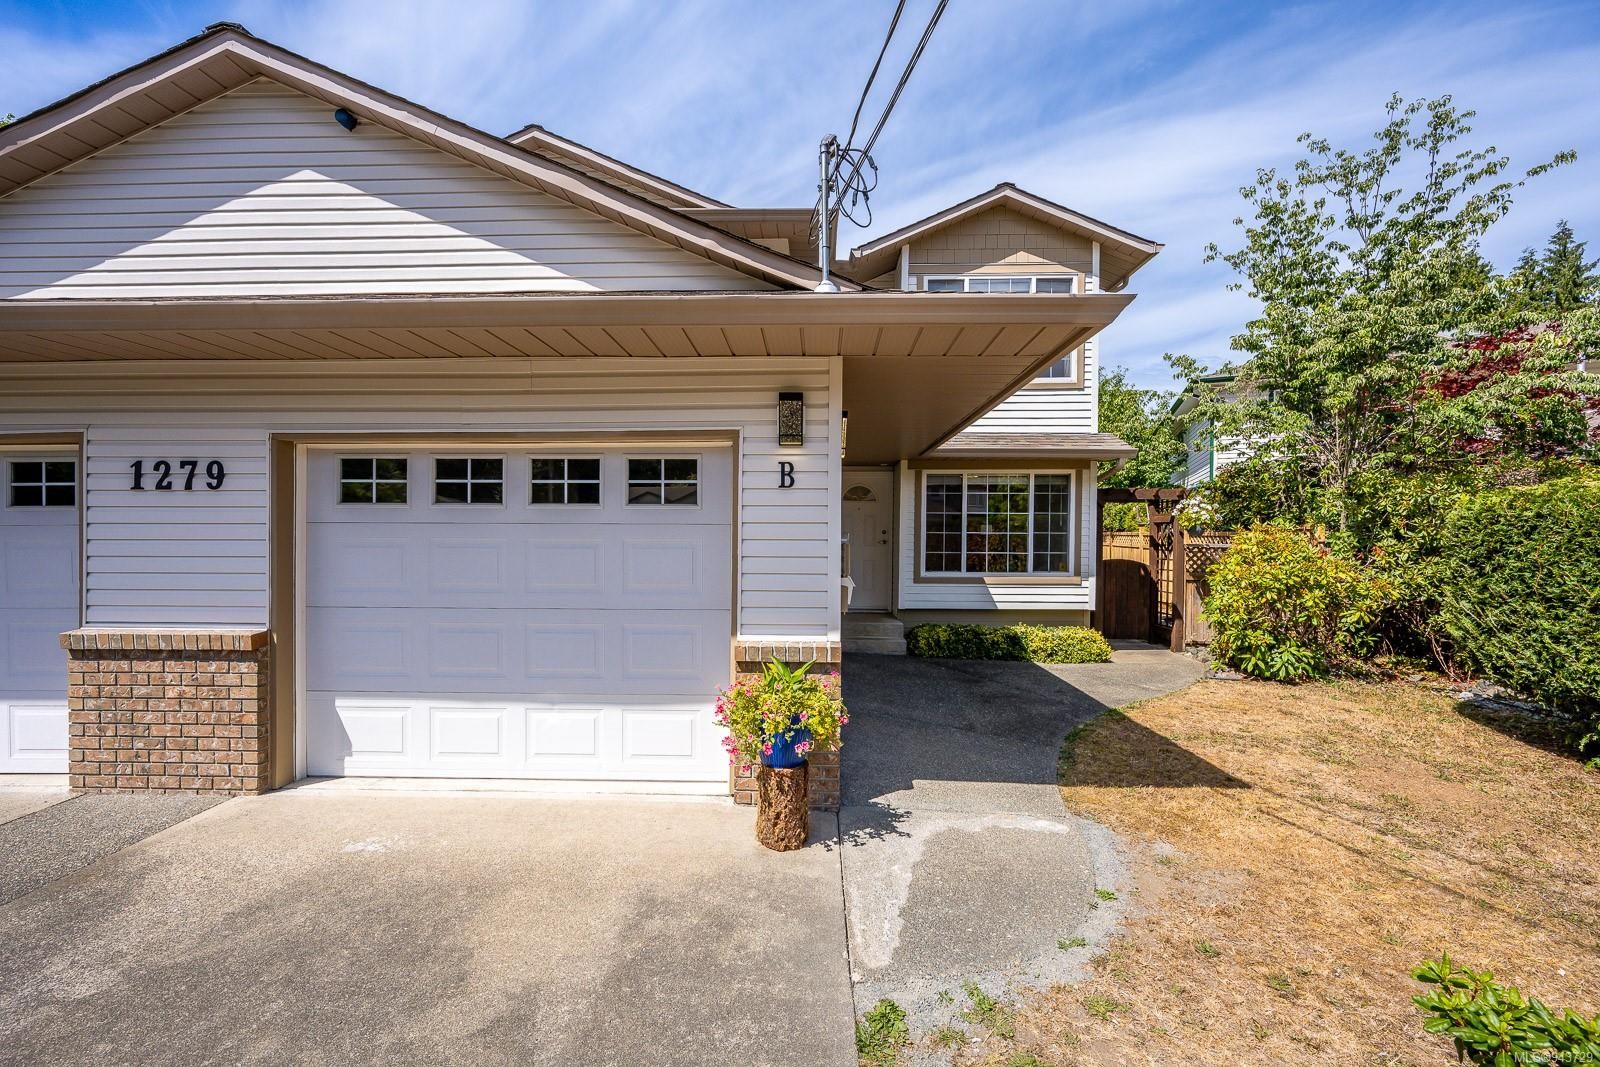 Open House. Open House on Saturday, September 30, 2023 10:00AM - 11:00AM
Please join us this Saturday from 10 to 11 AM for an Open House to tour this charming half duplex.